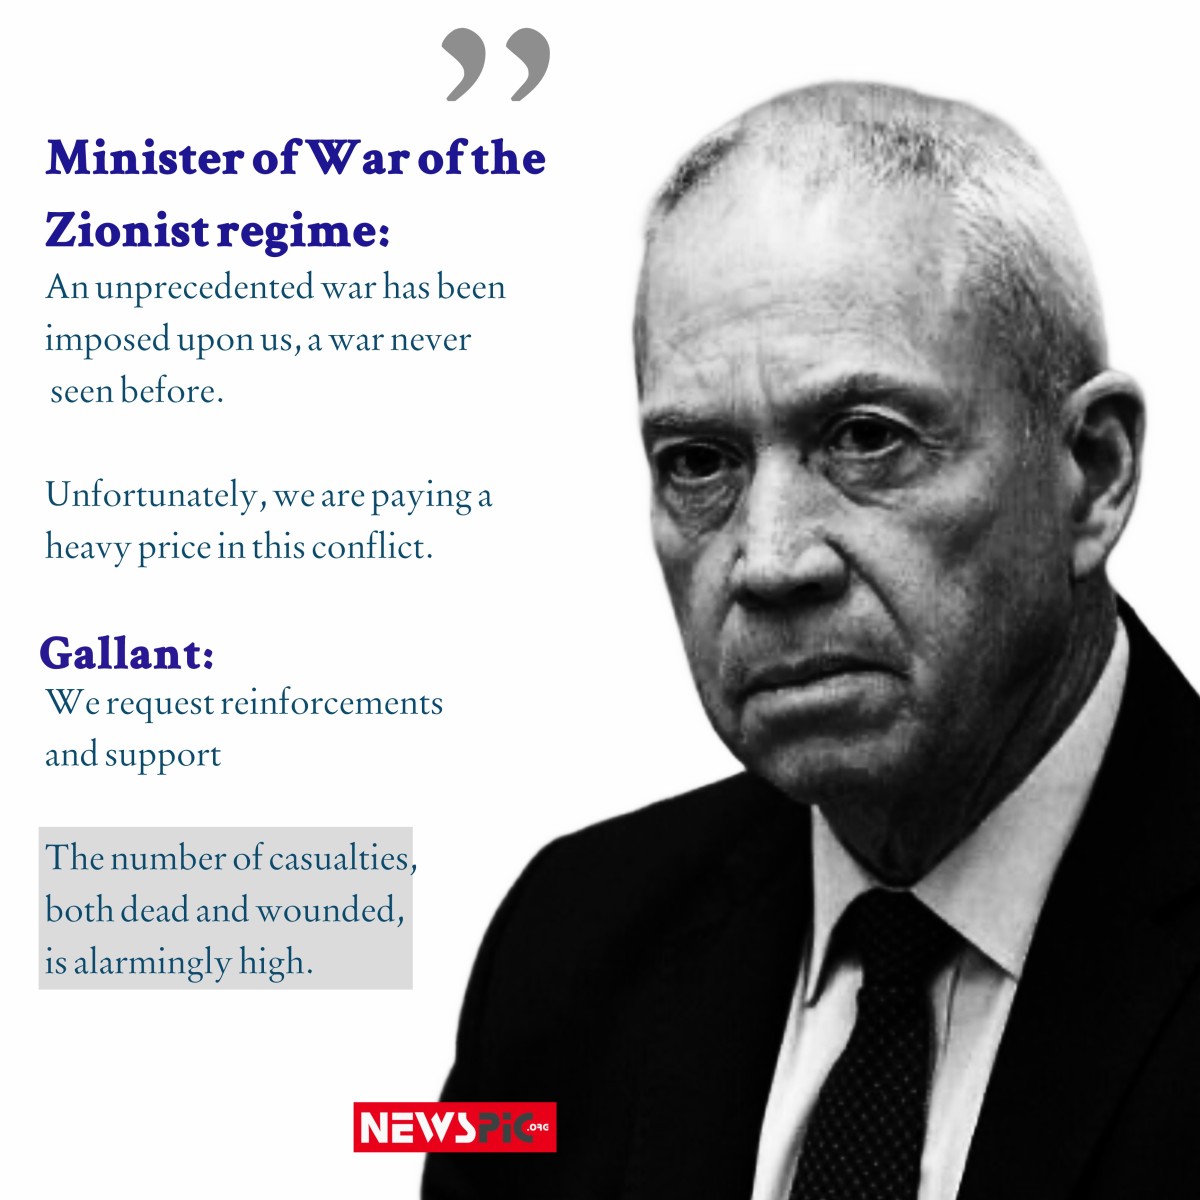 Minister of War of the Zionist regime